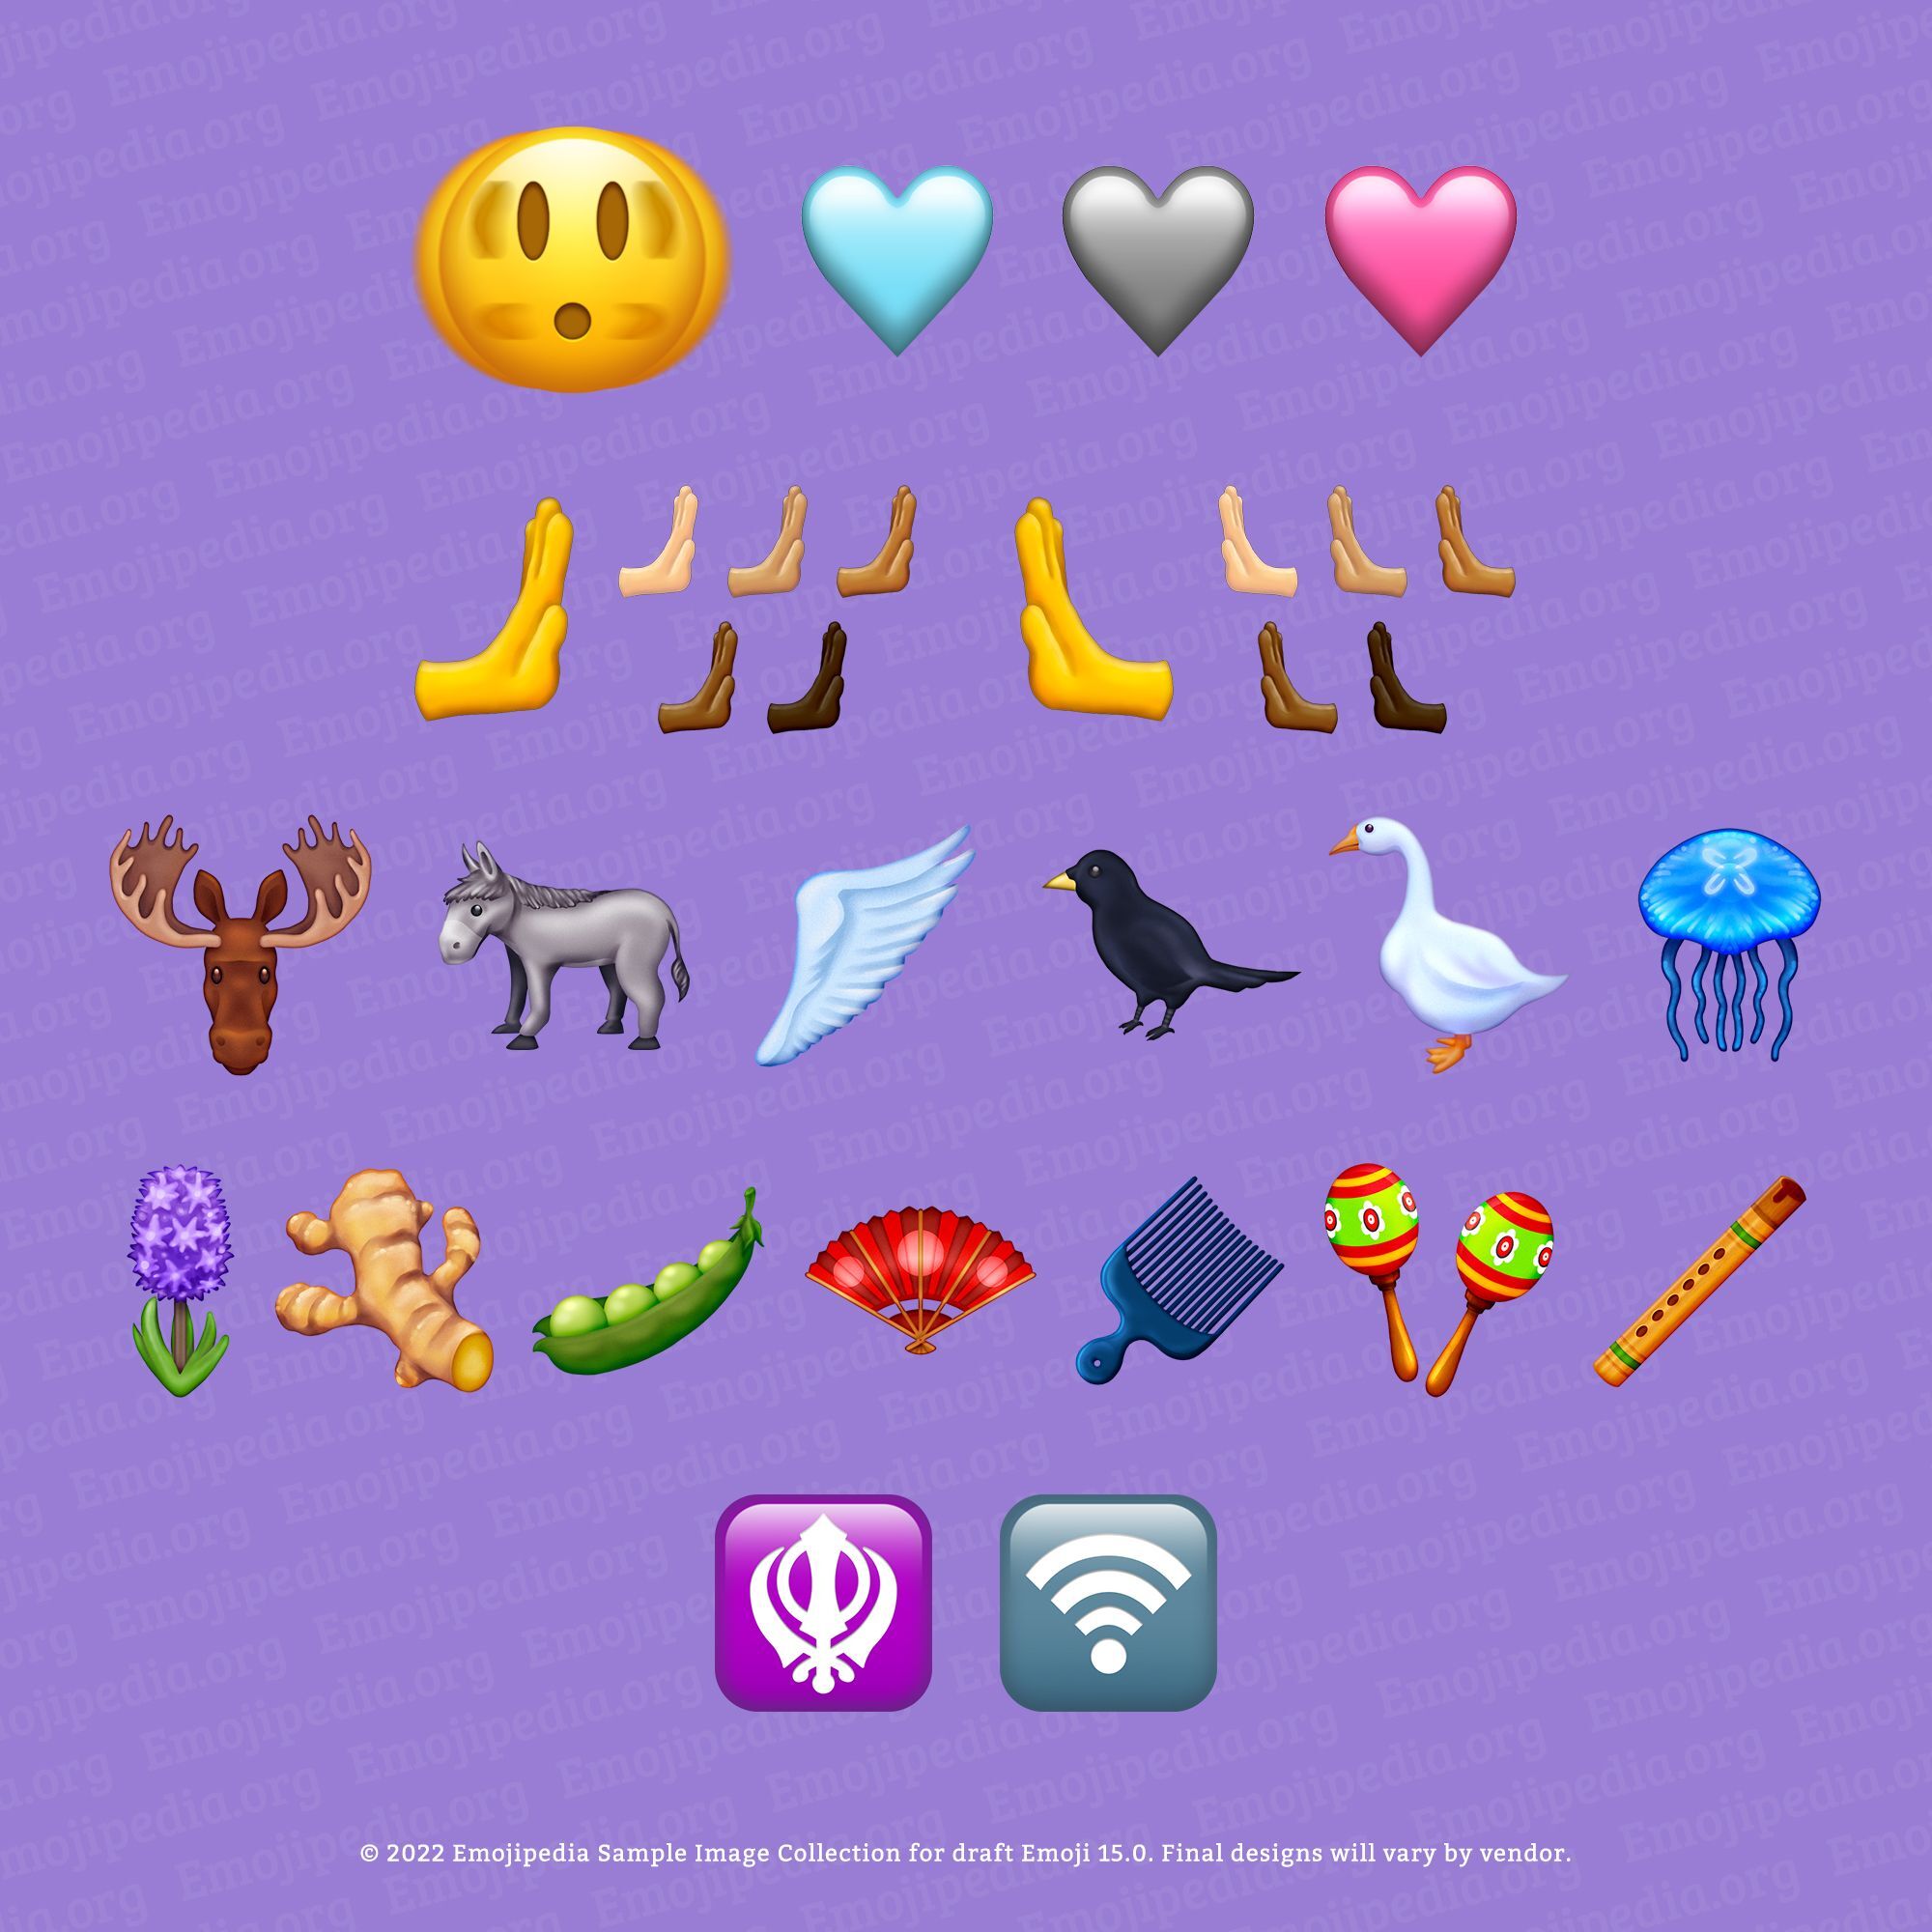 All the new emoji that will be coming with iOS 16.4 (Image cred - Emojipedia.org - Inside iOS 16.4: All the bug fixes and new features in the latest public beta